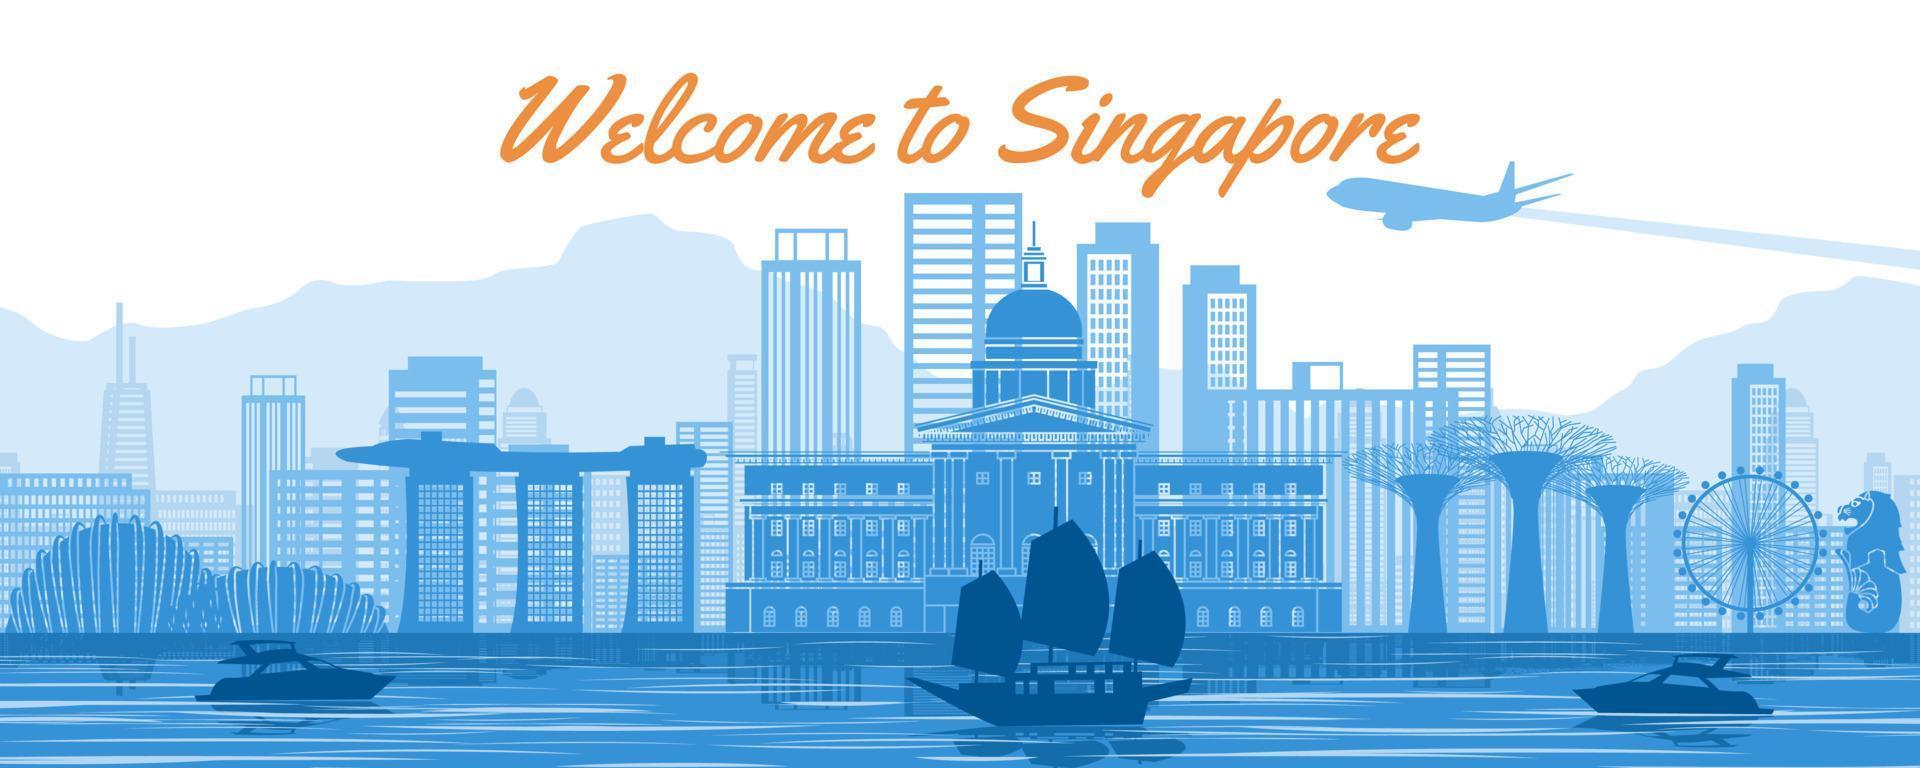 Singapore famous landmark with blue and white color design vector